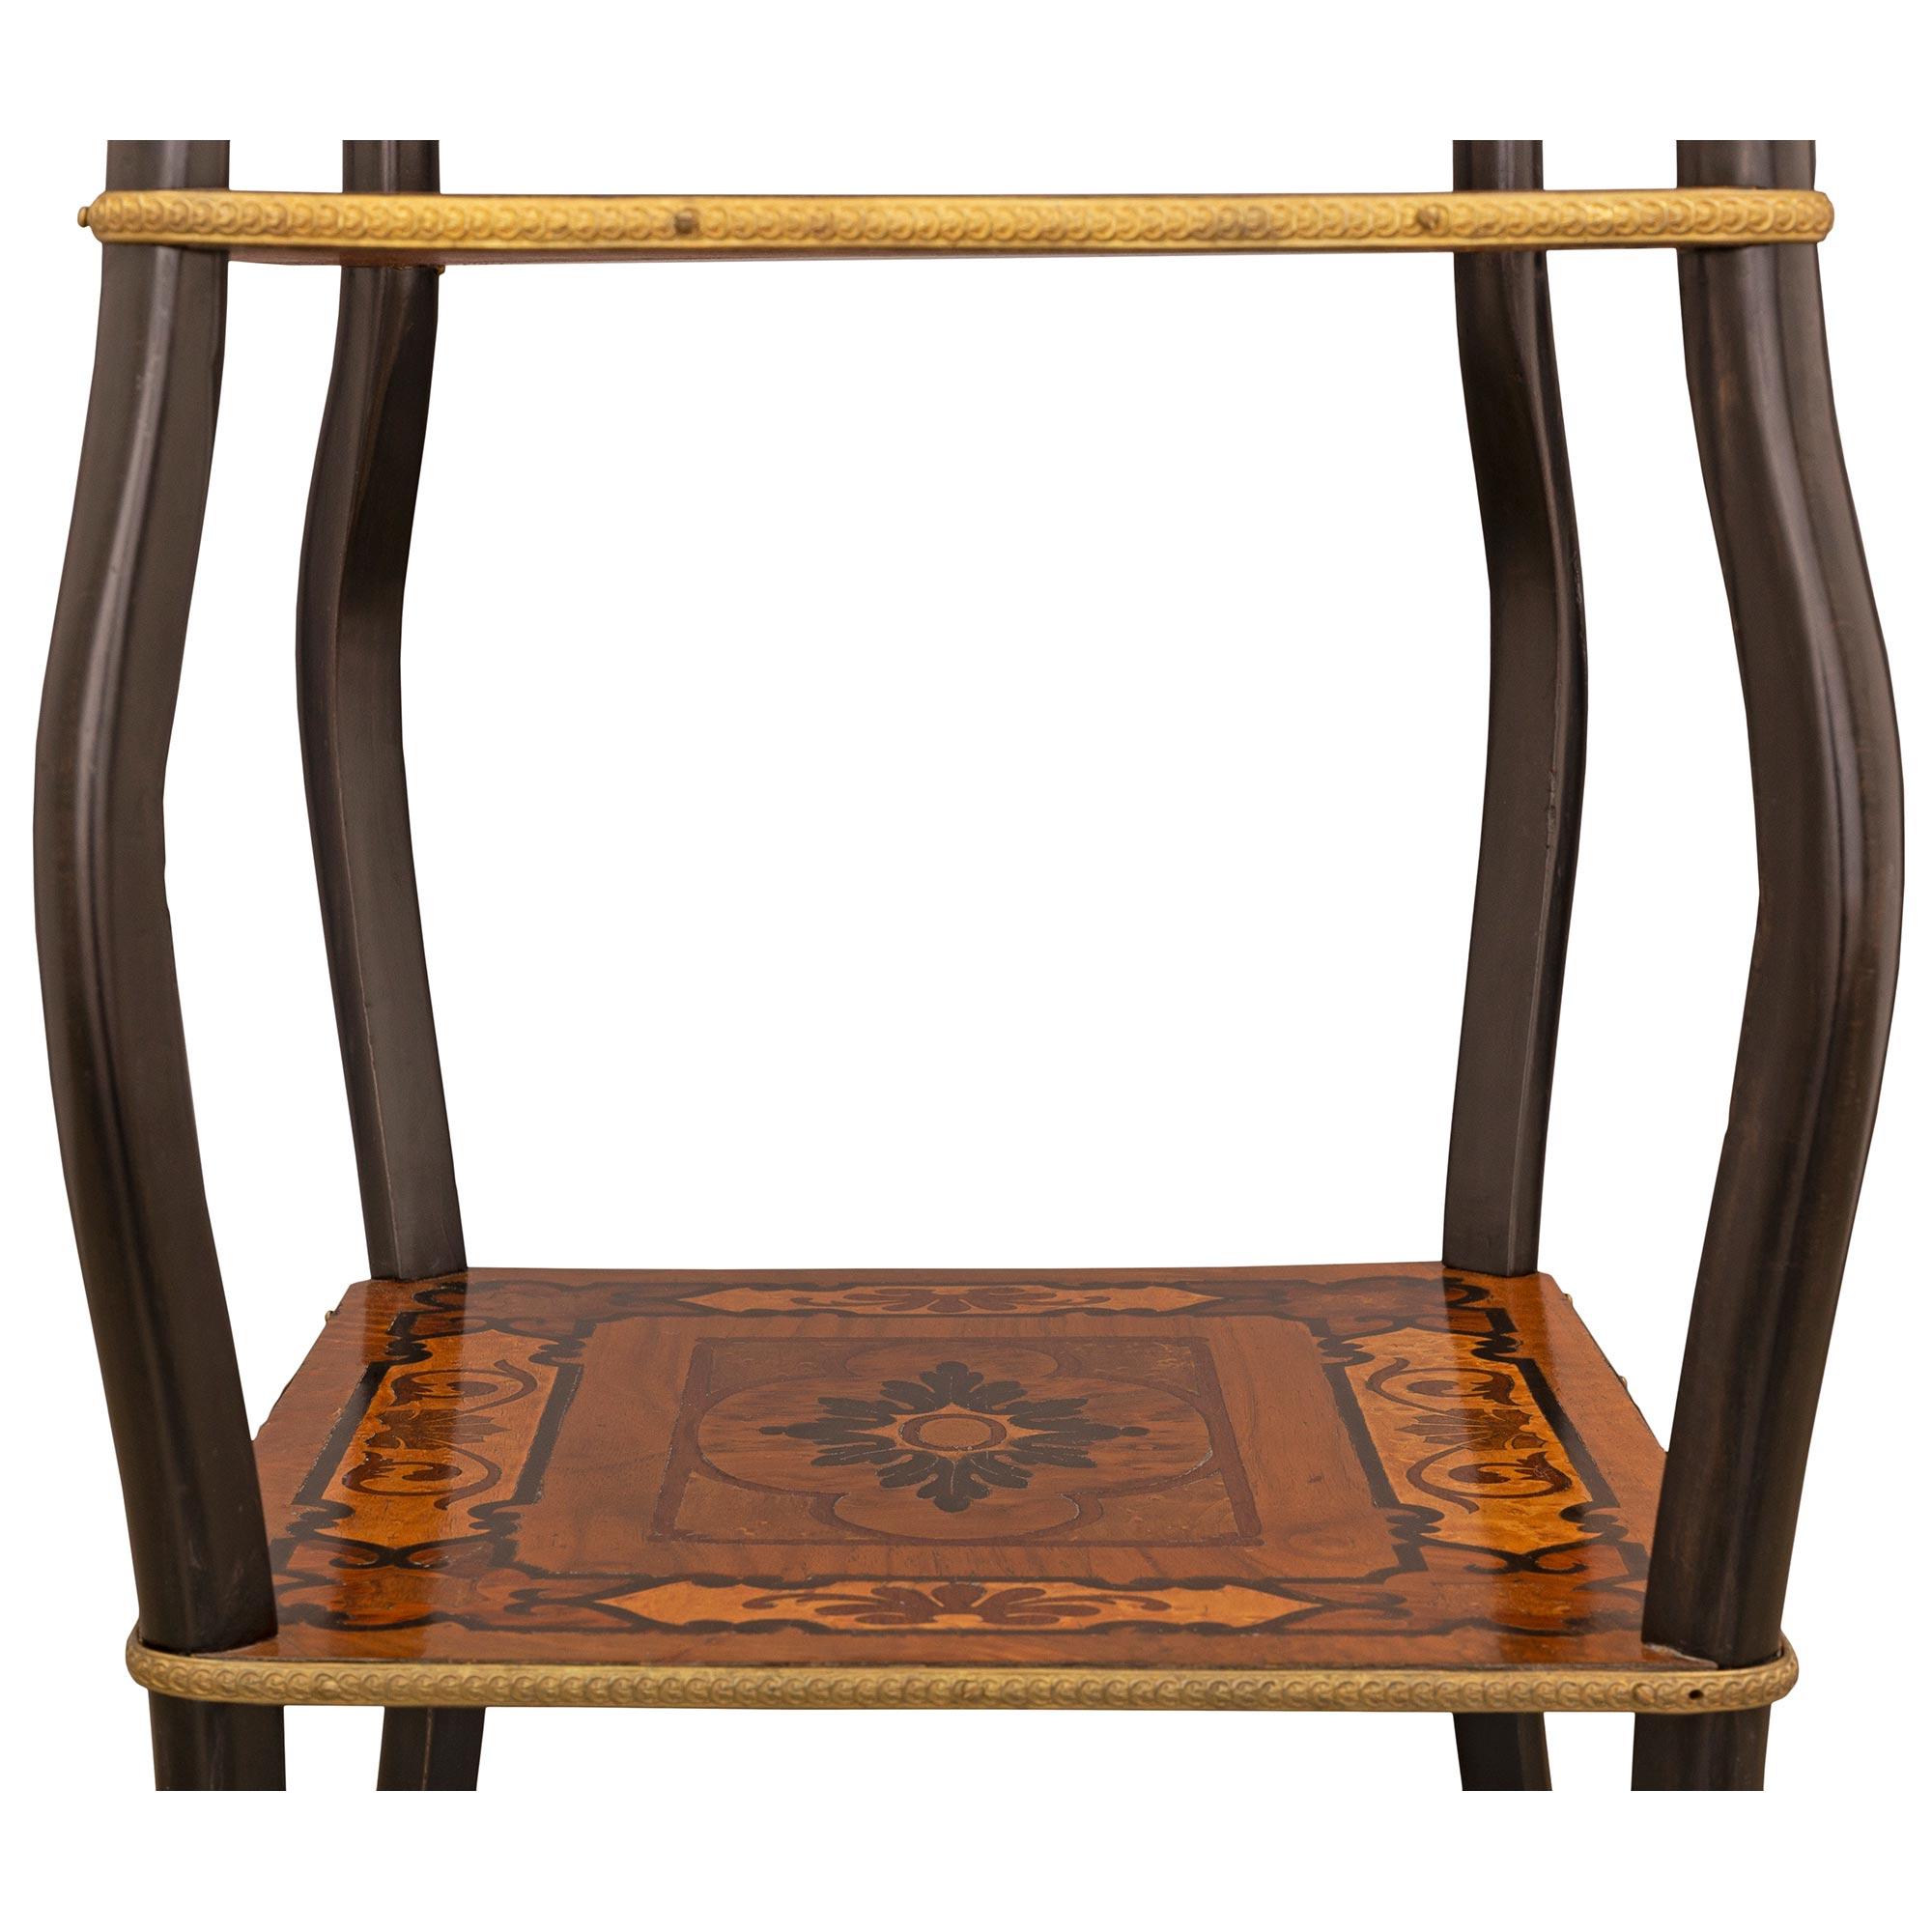 French 19th Century Napoleon III Period Ebony, Exotic Wood, & Ormolu Side Table For Sale 5